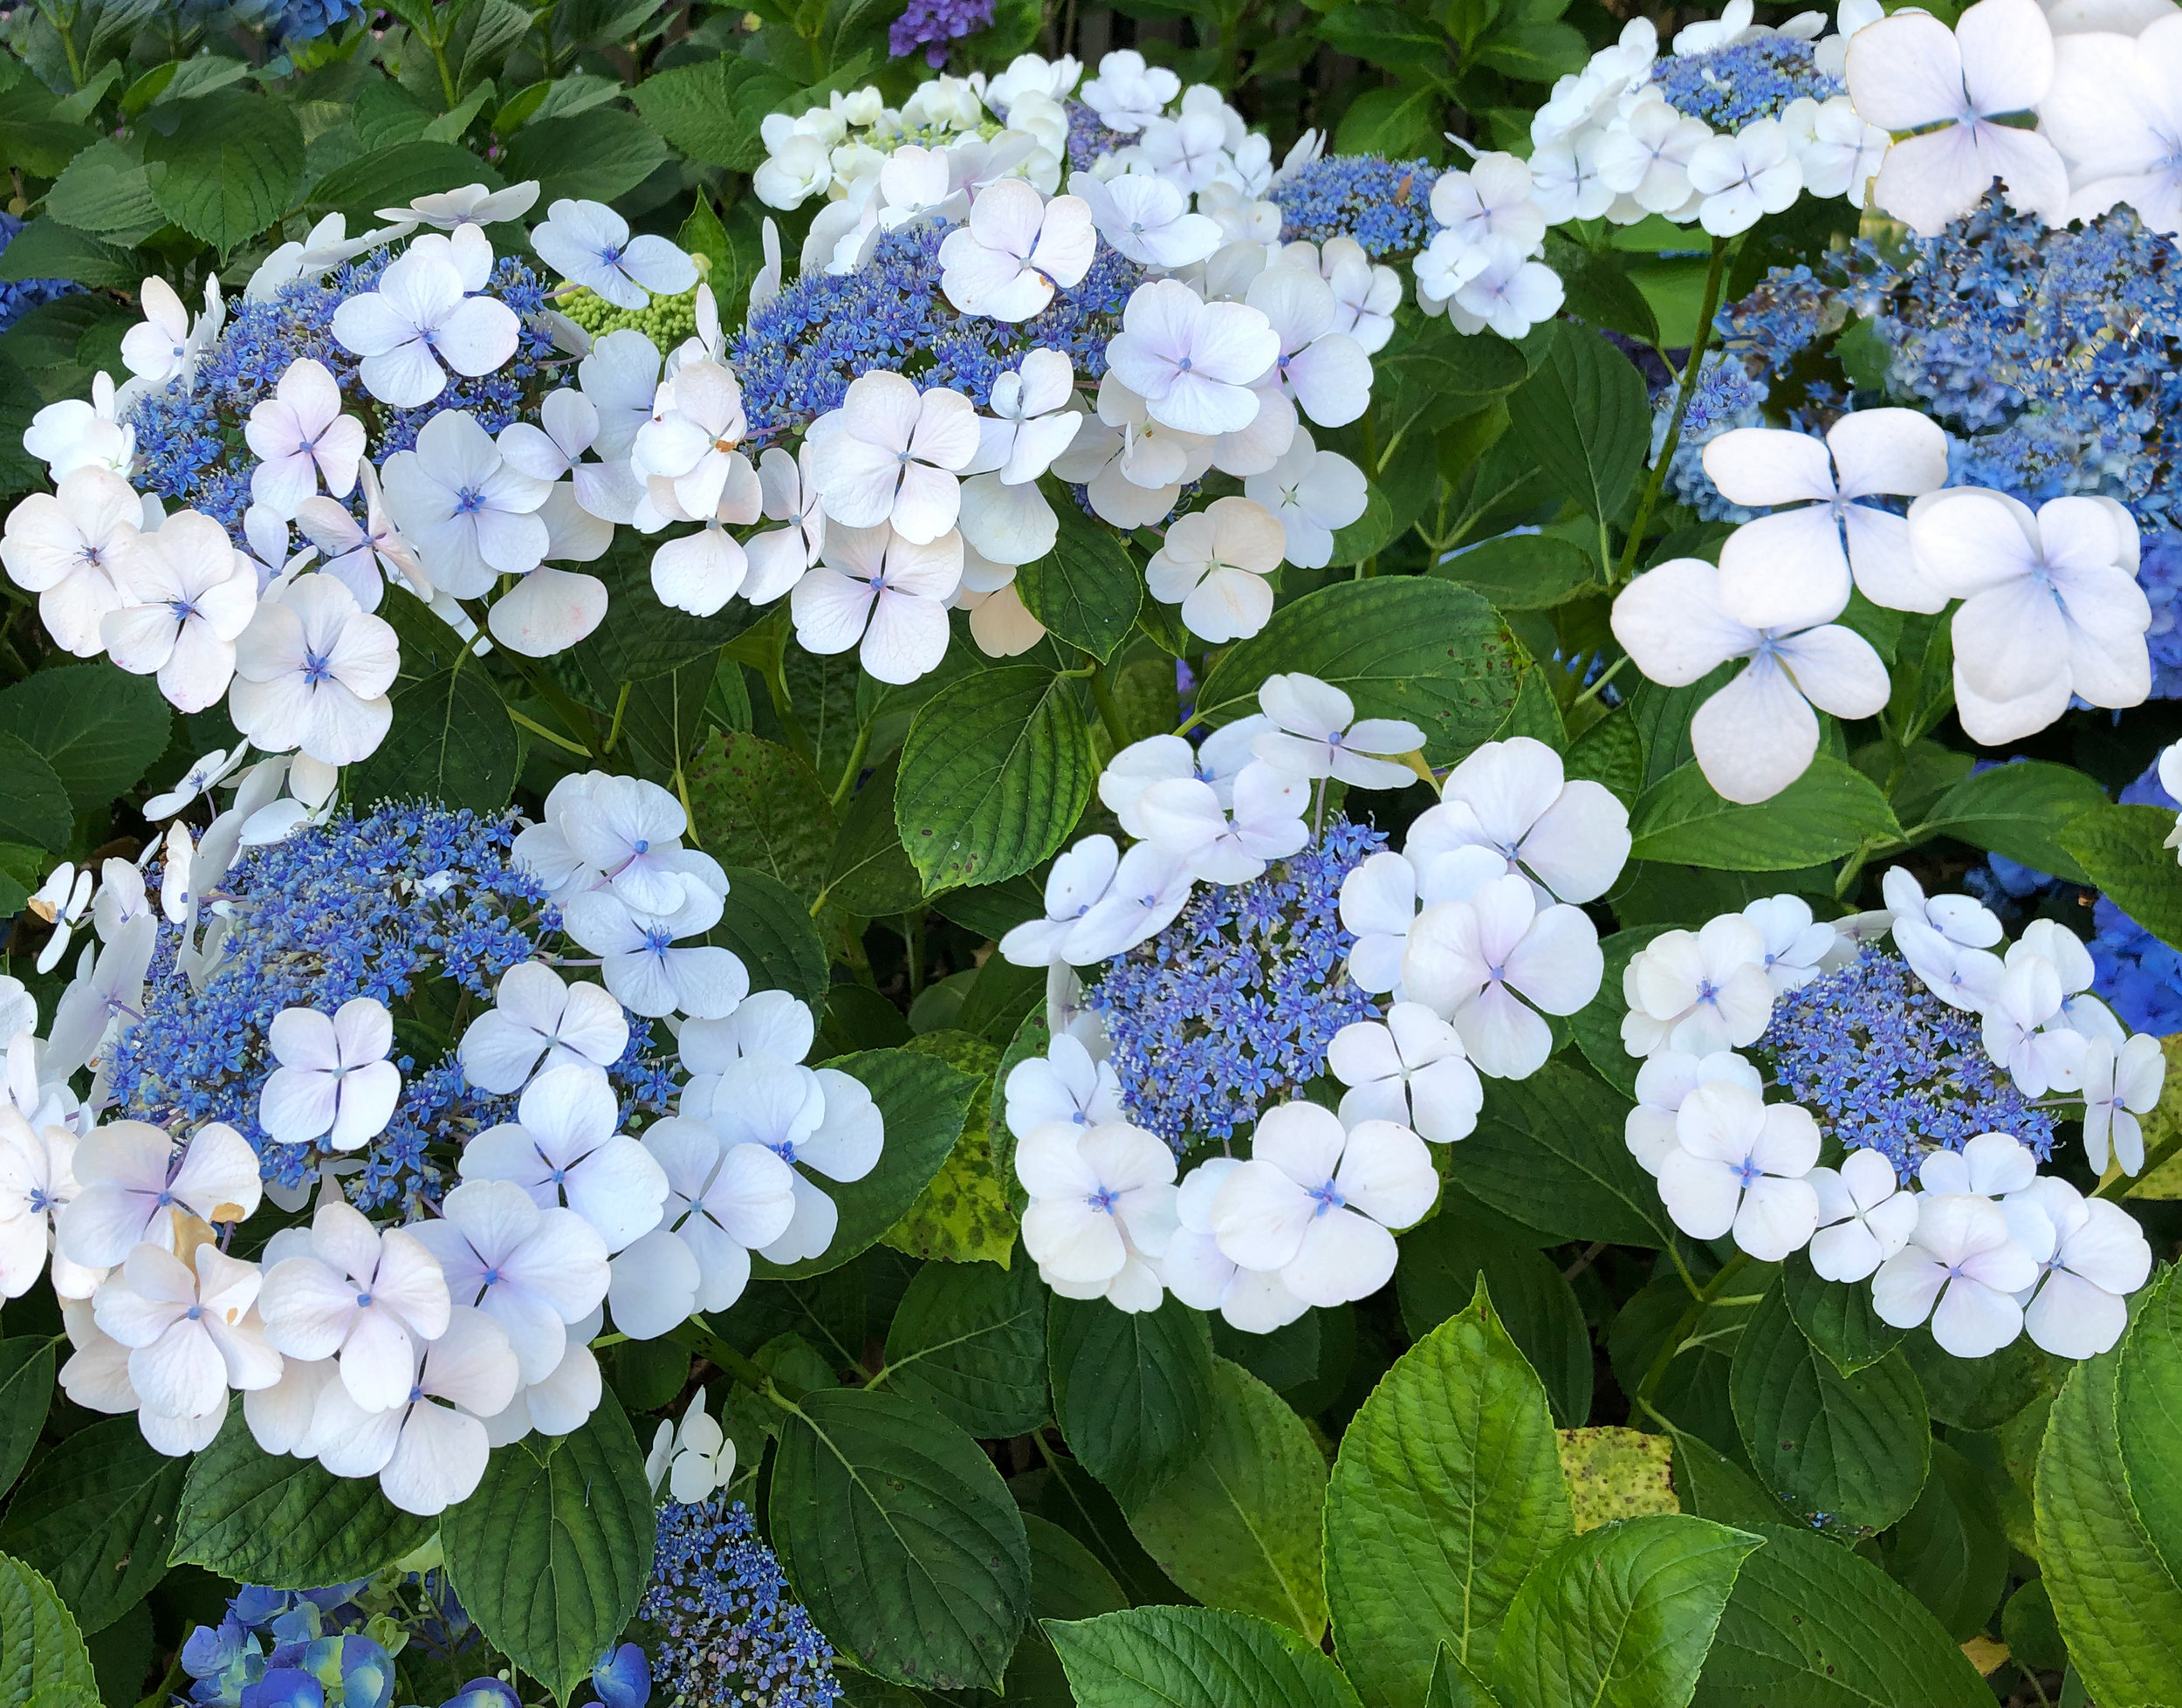 Lacecap hydrangeas require the same pruning that the mopheads do, immediately after blooming.